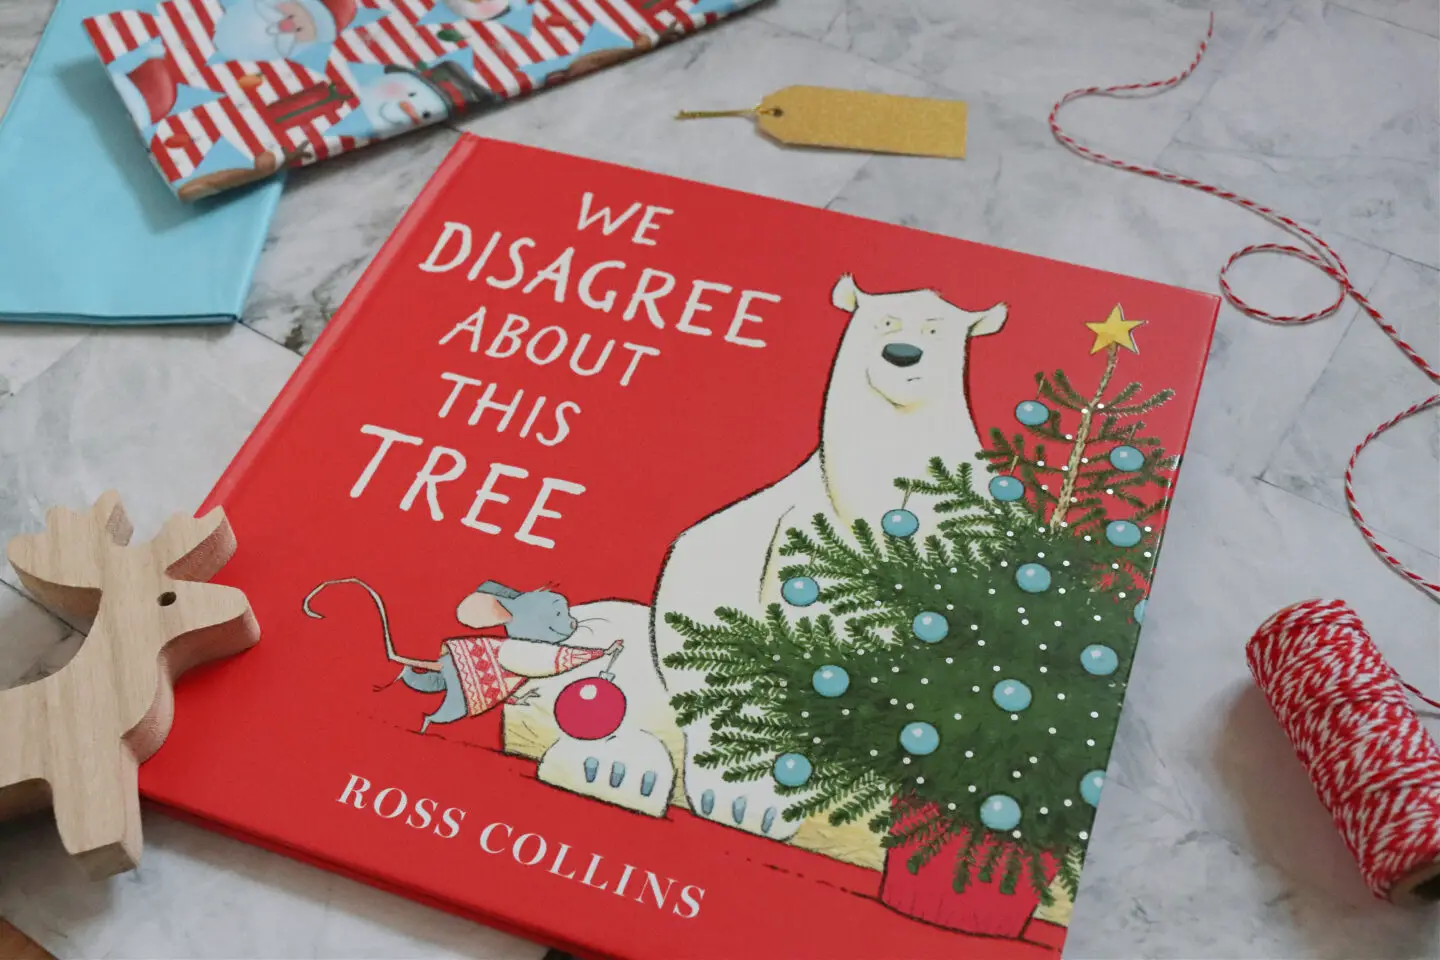 We Disagree About the Tree Ross Collins book